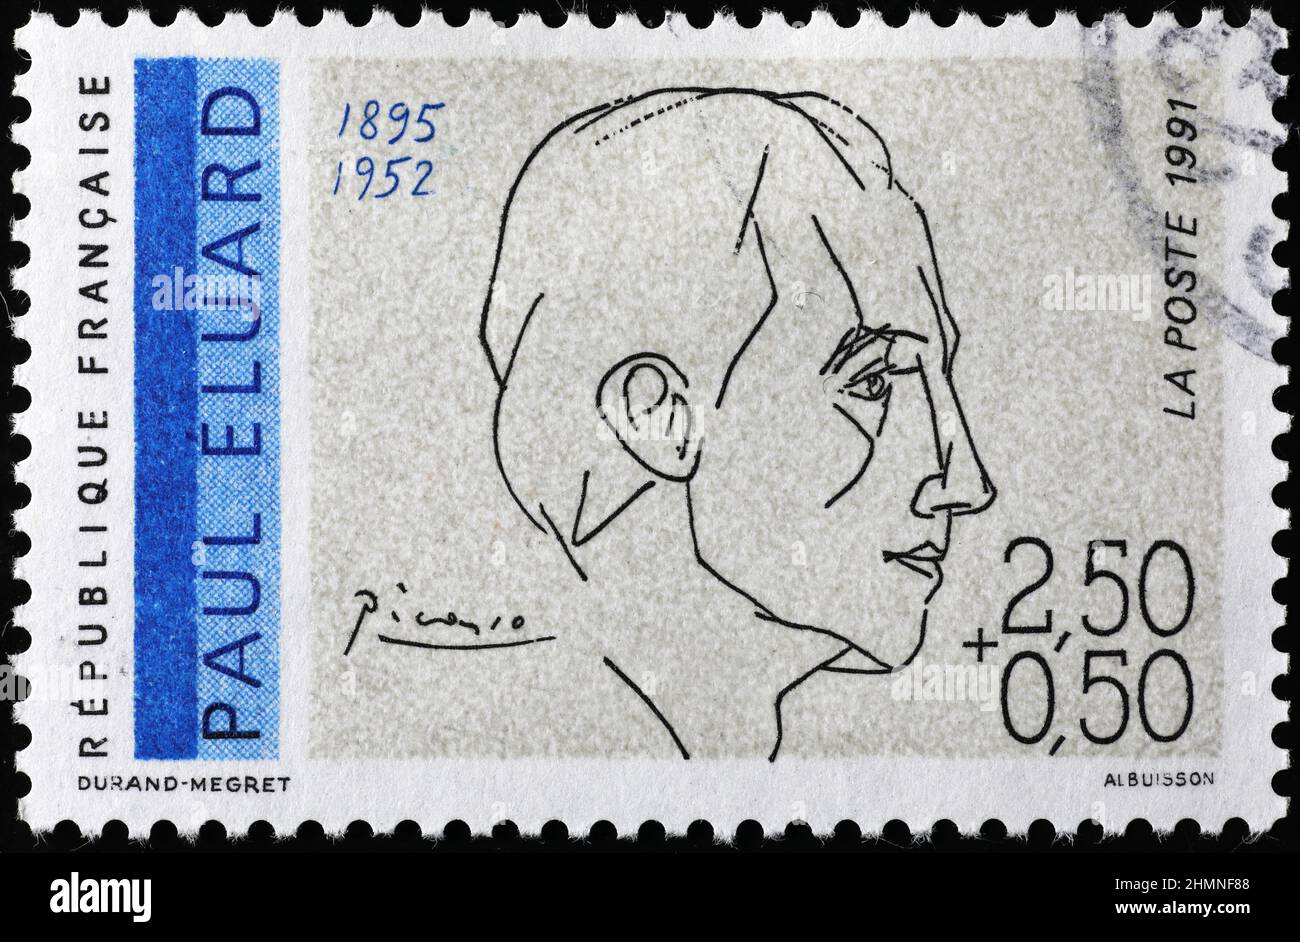 Portrait of Paul Eluard by Picasso on postage stamp Stock Photo